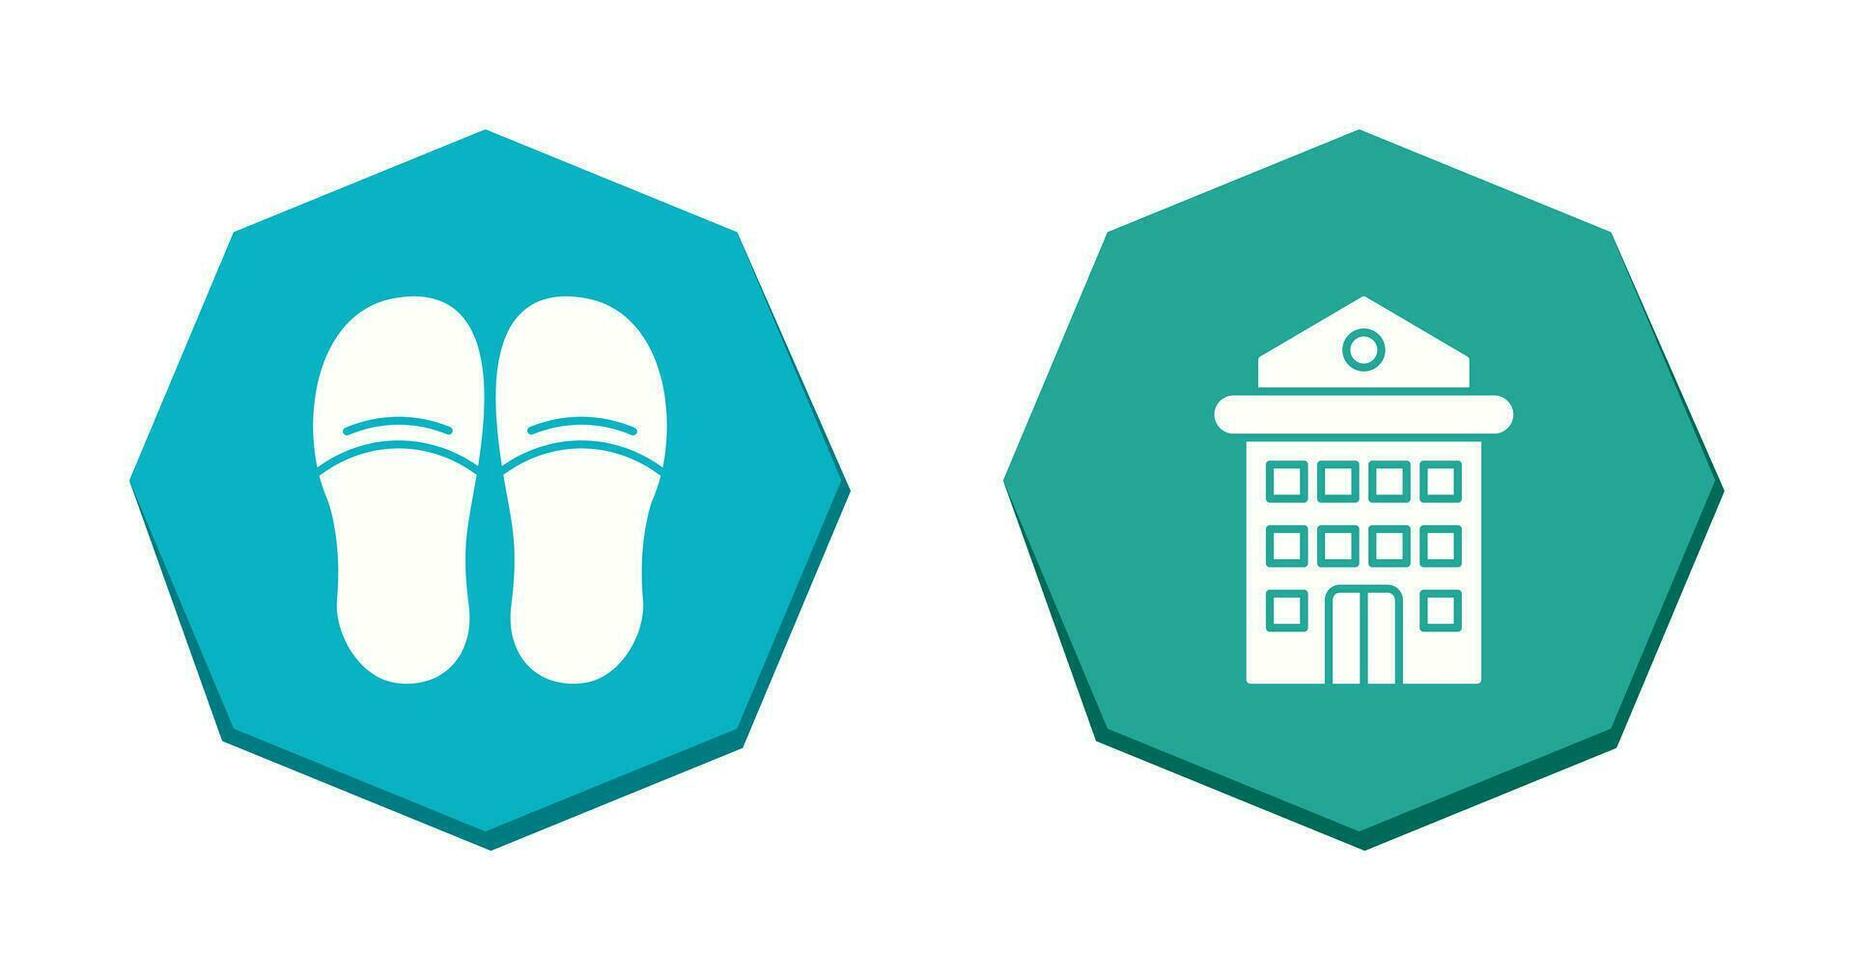 Slippers and Hotel Icon vector